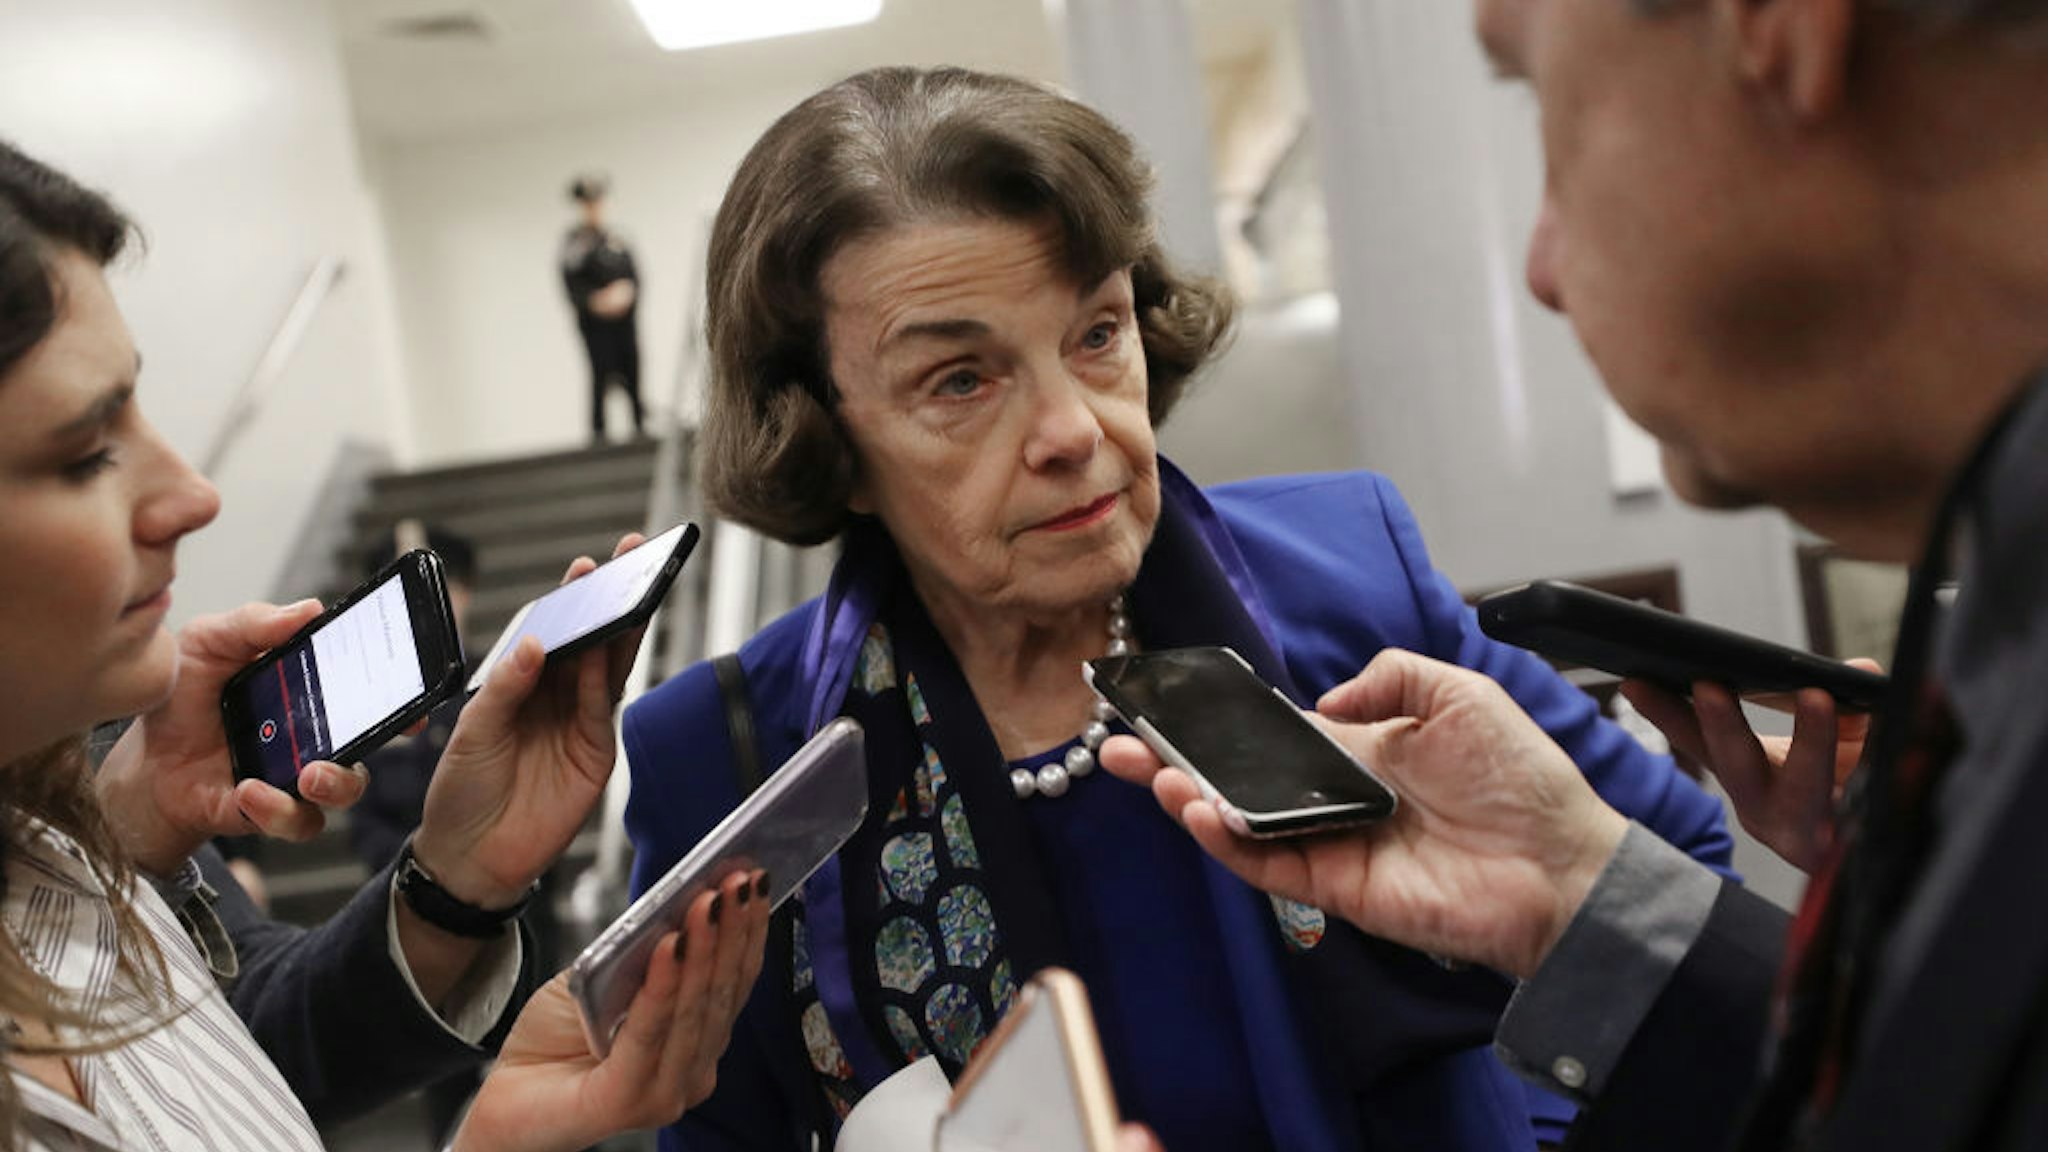 Sen. Dianne Feinstein (D-CA) speaks to reporters while departing the U.S. Capitol after the Senate impeachment trial adjourned for the day on January 28, 2020 in Washington, DC. President Donald Trump's legal defense team concluded their arguments today and will begin answering written questions from Senators on Wednesday. (Photo by Mario Tama/Getty Images)